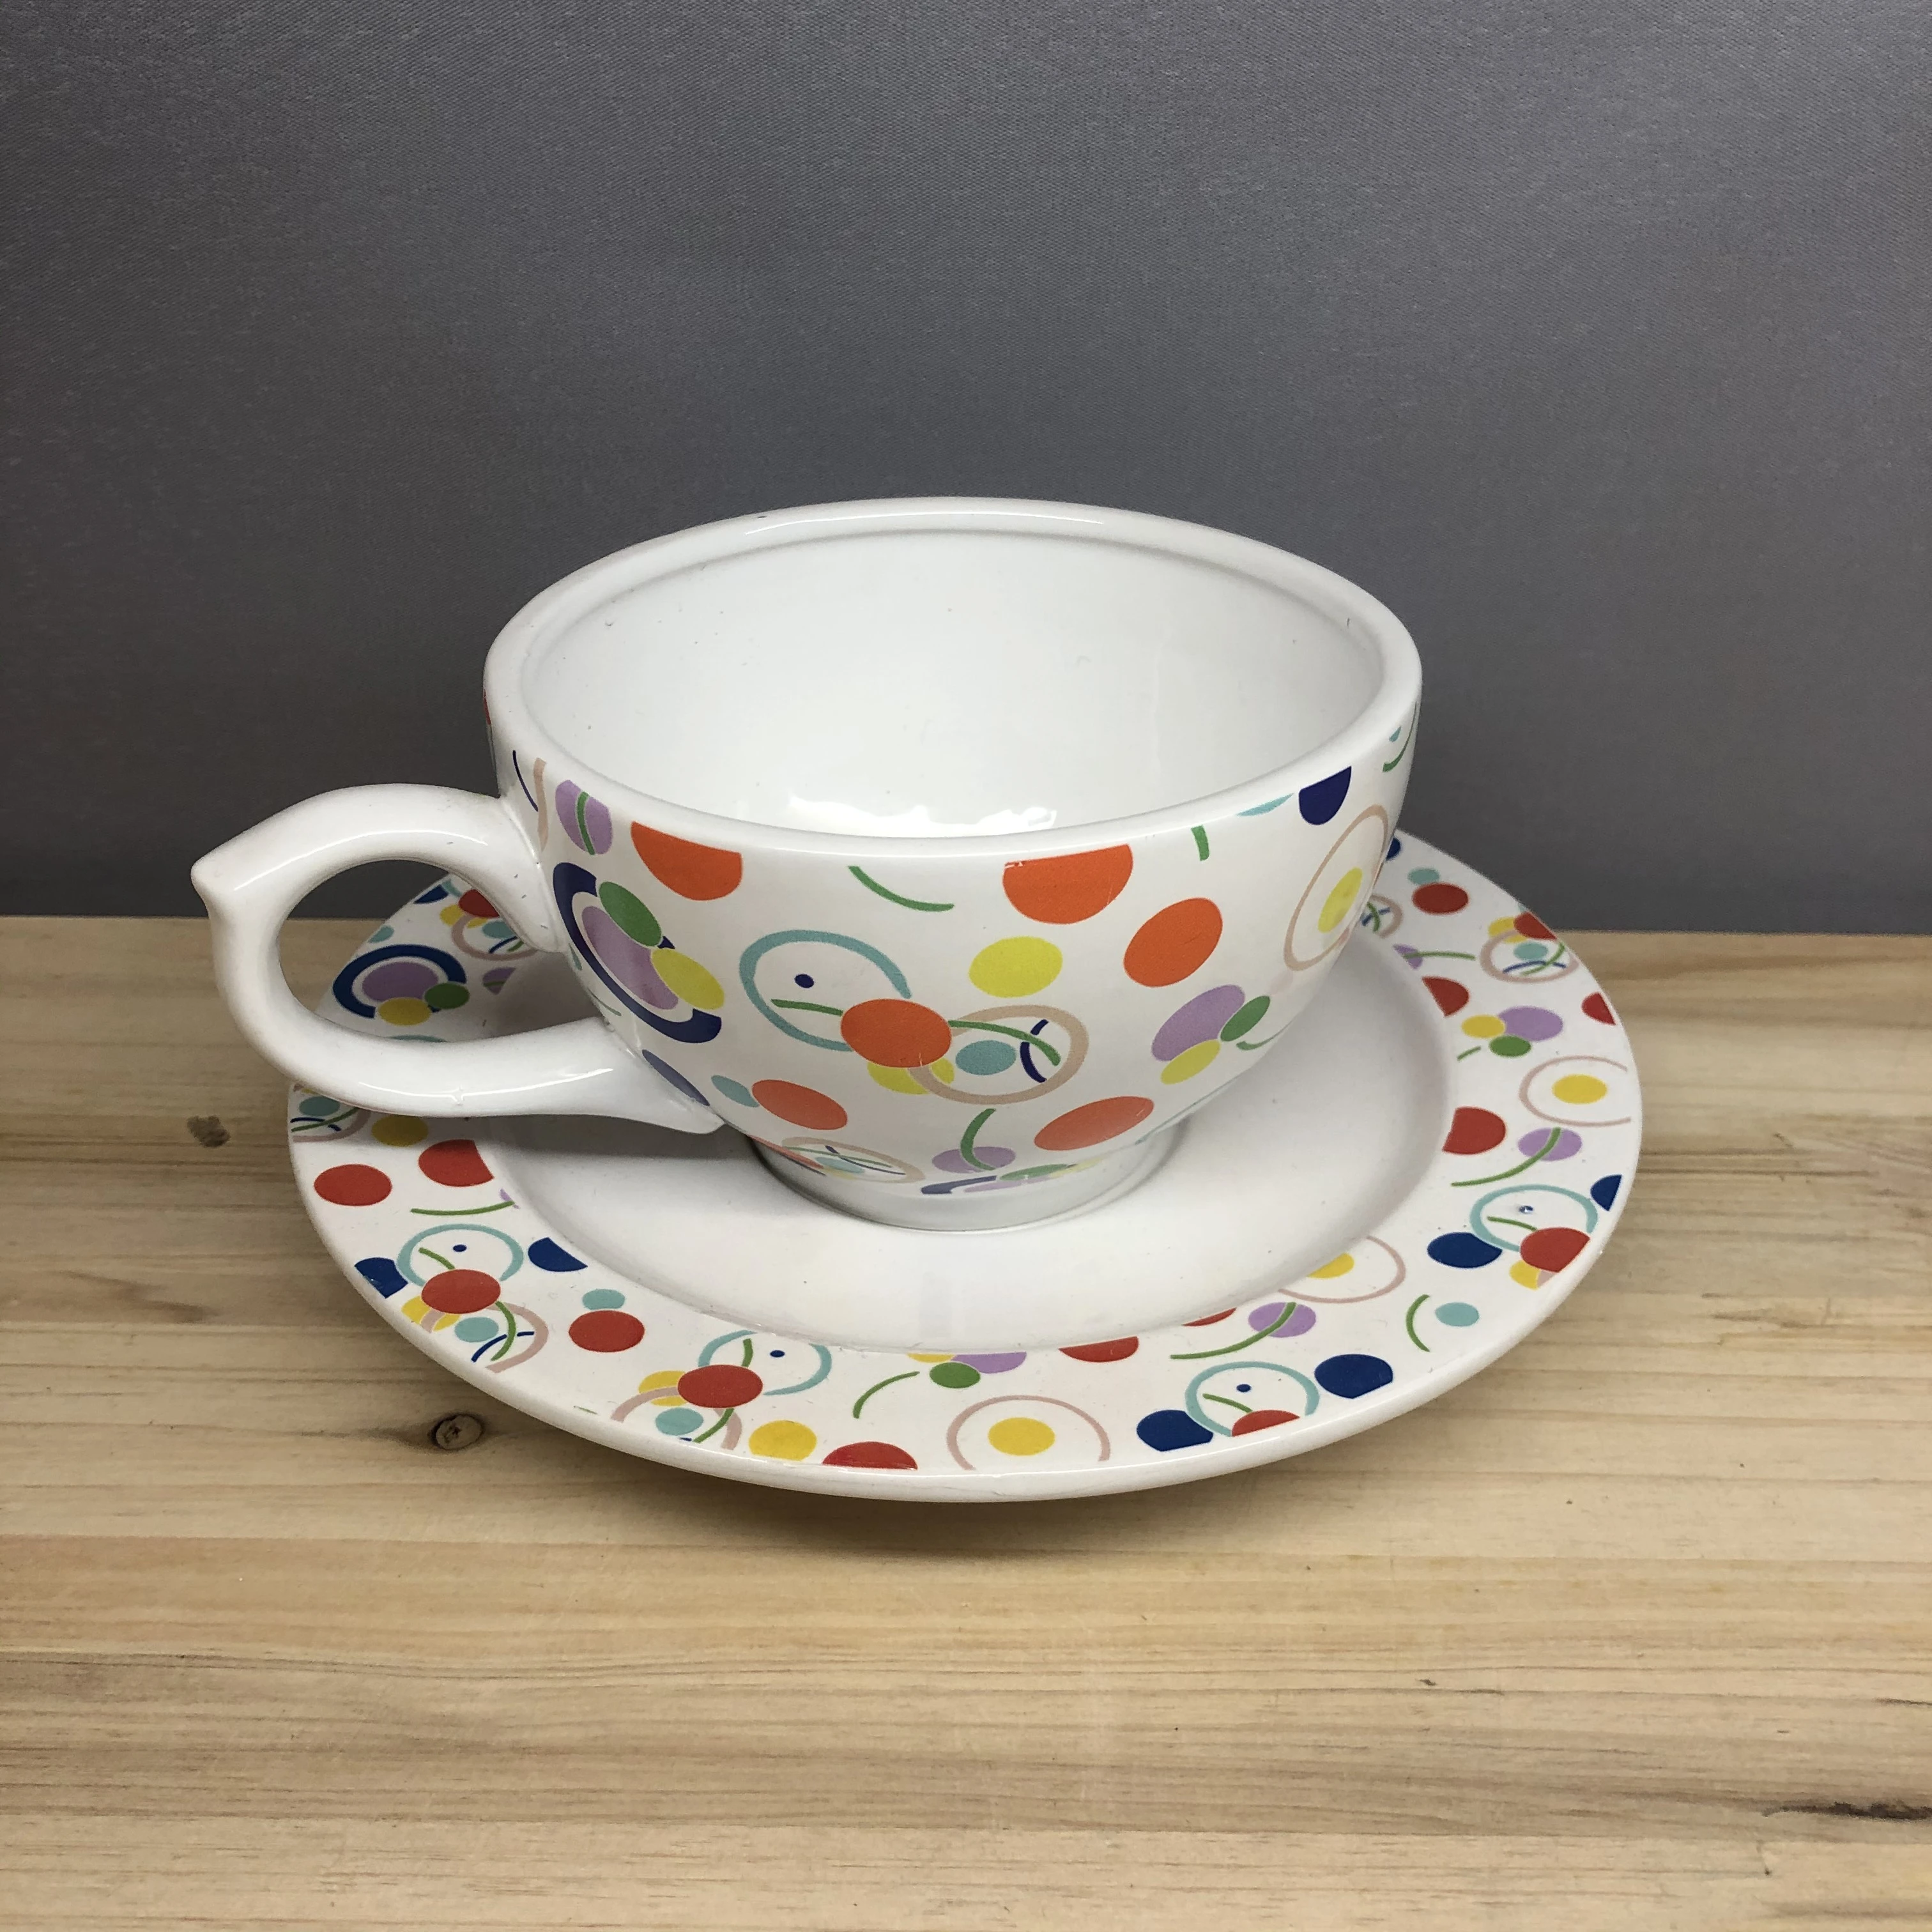 Household ceramic coffee cup and teacup set